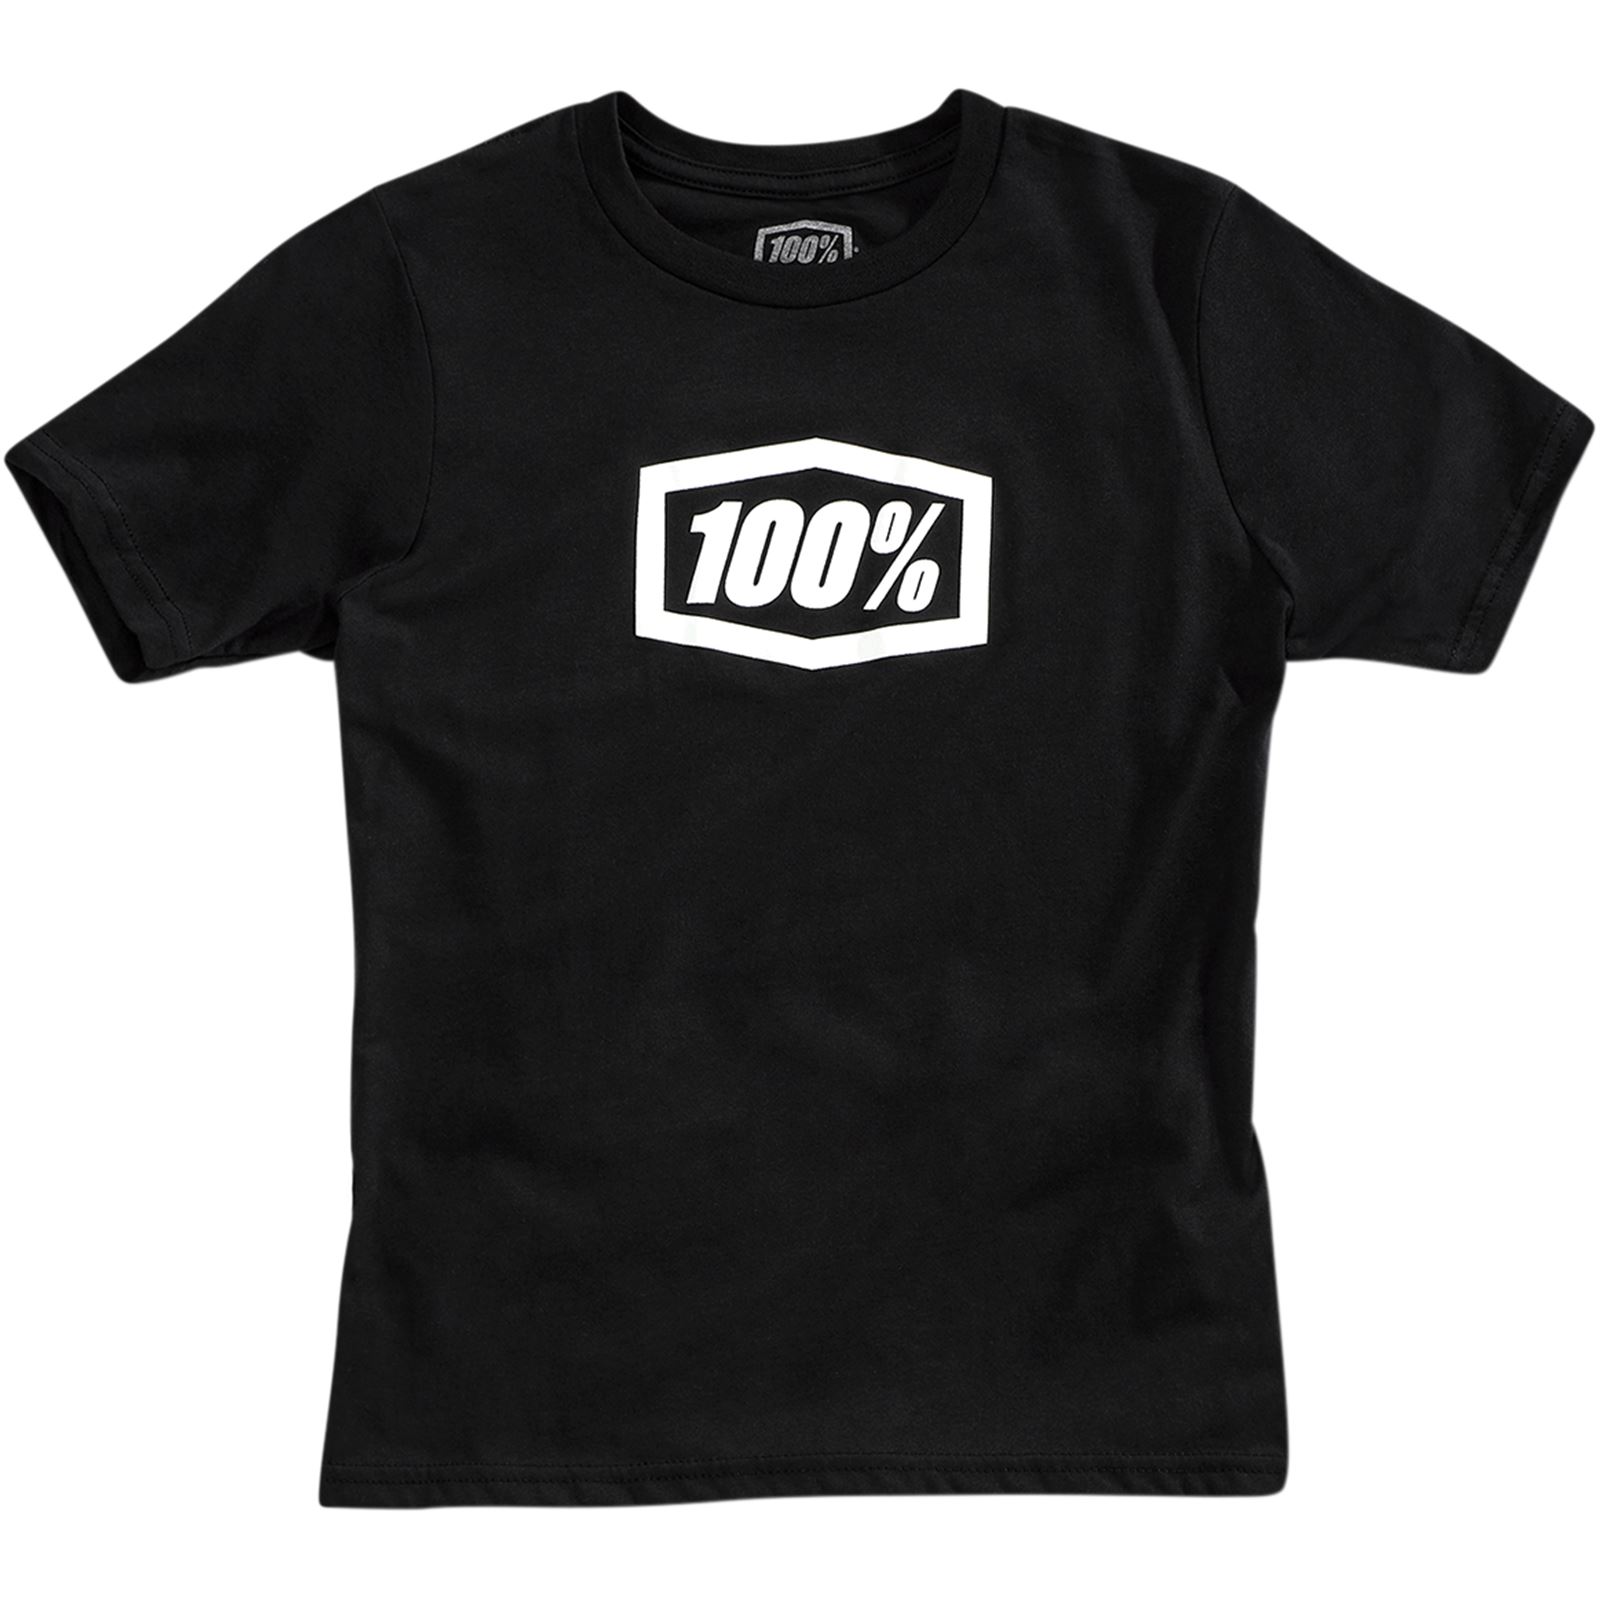 100% Youth Essential T-Shirt - Black - Large